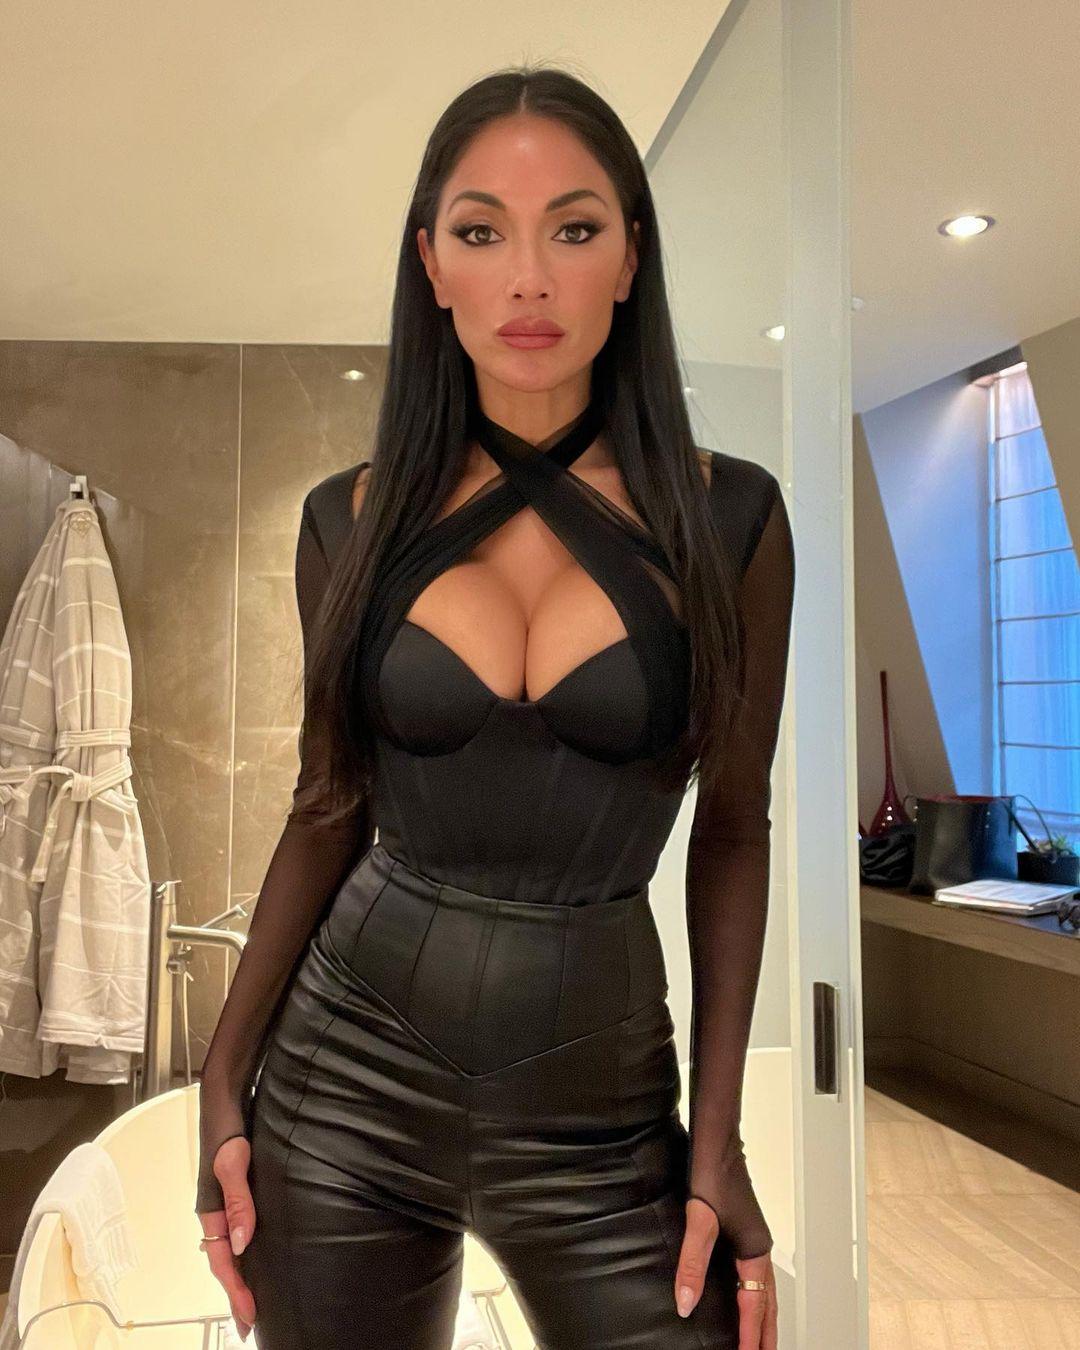 Nicole Scherzinger Can't Contain Bust In Skintight Catsuit As She Hits Broadway Milestone